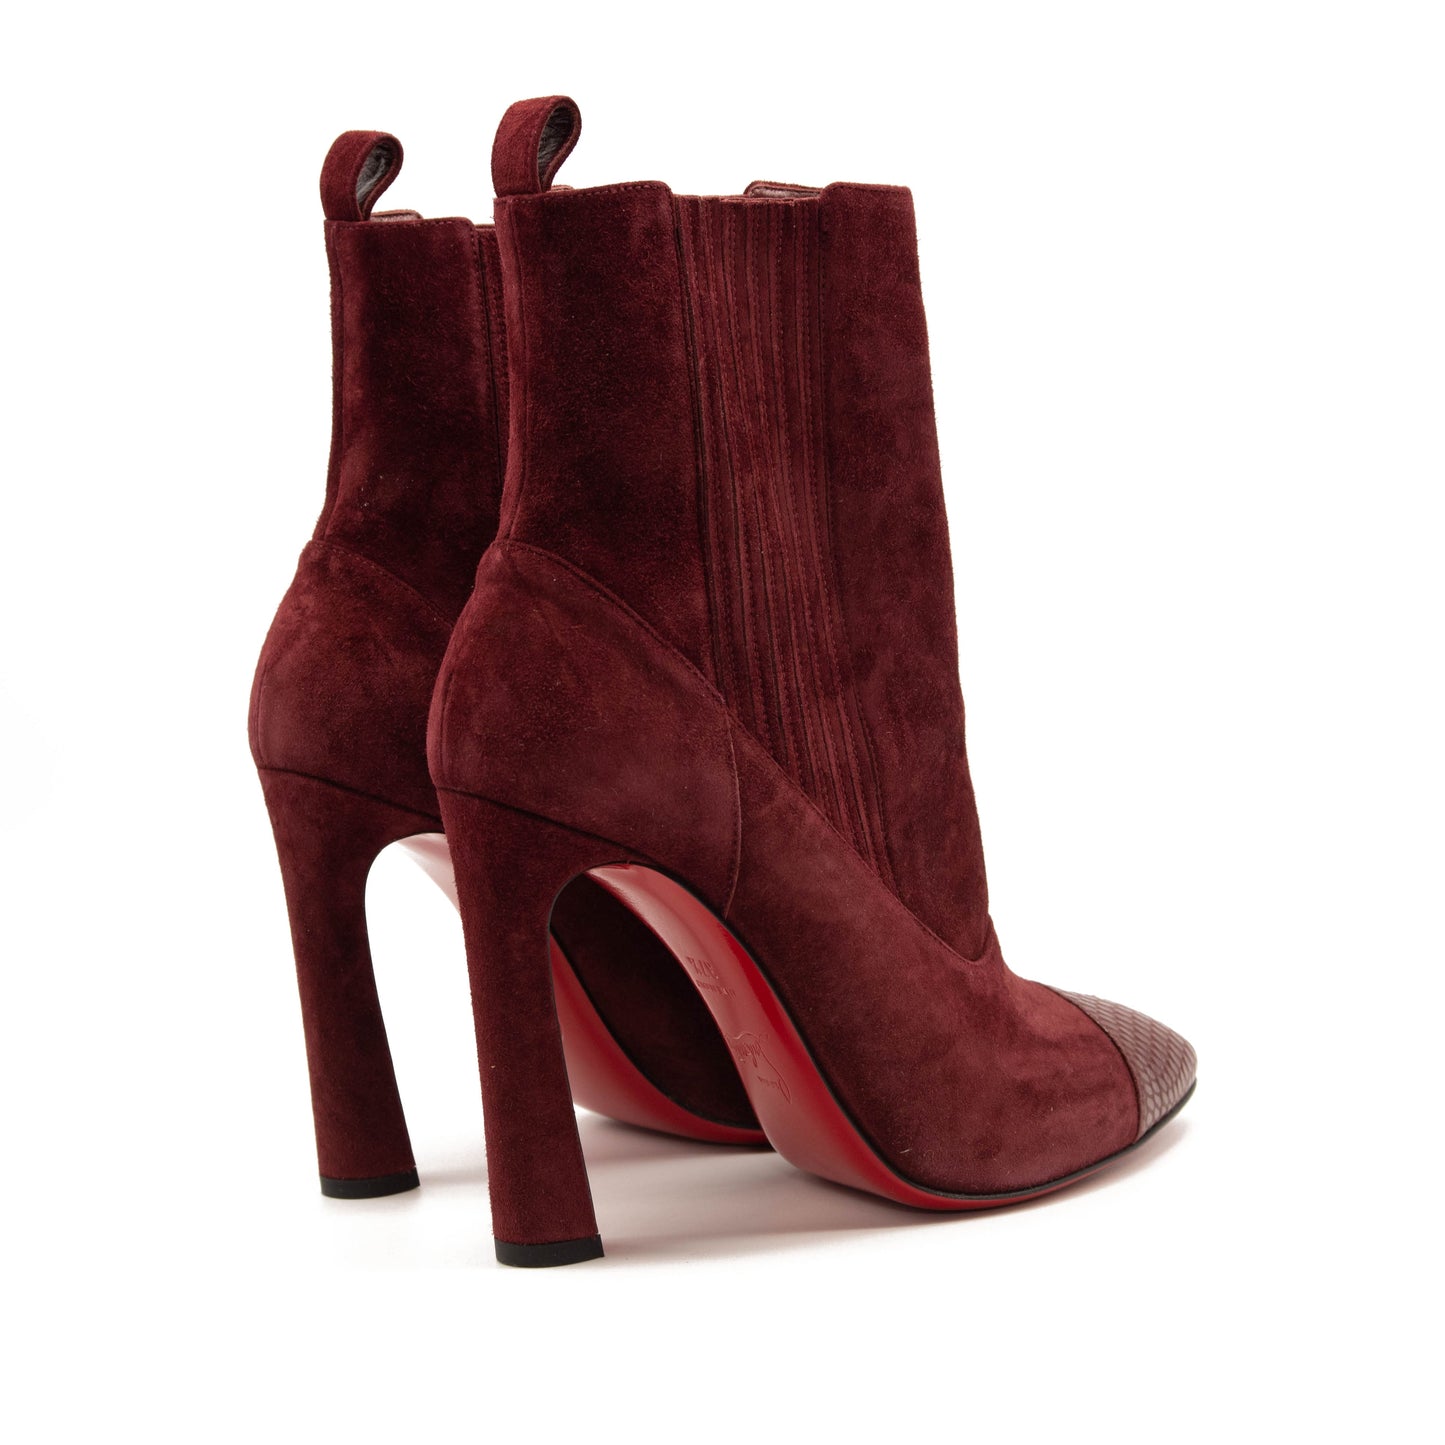 NEW Christian Louboutin Me In The 90s Maroon Suede Snake High Heel Ankle Booties 37.5